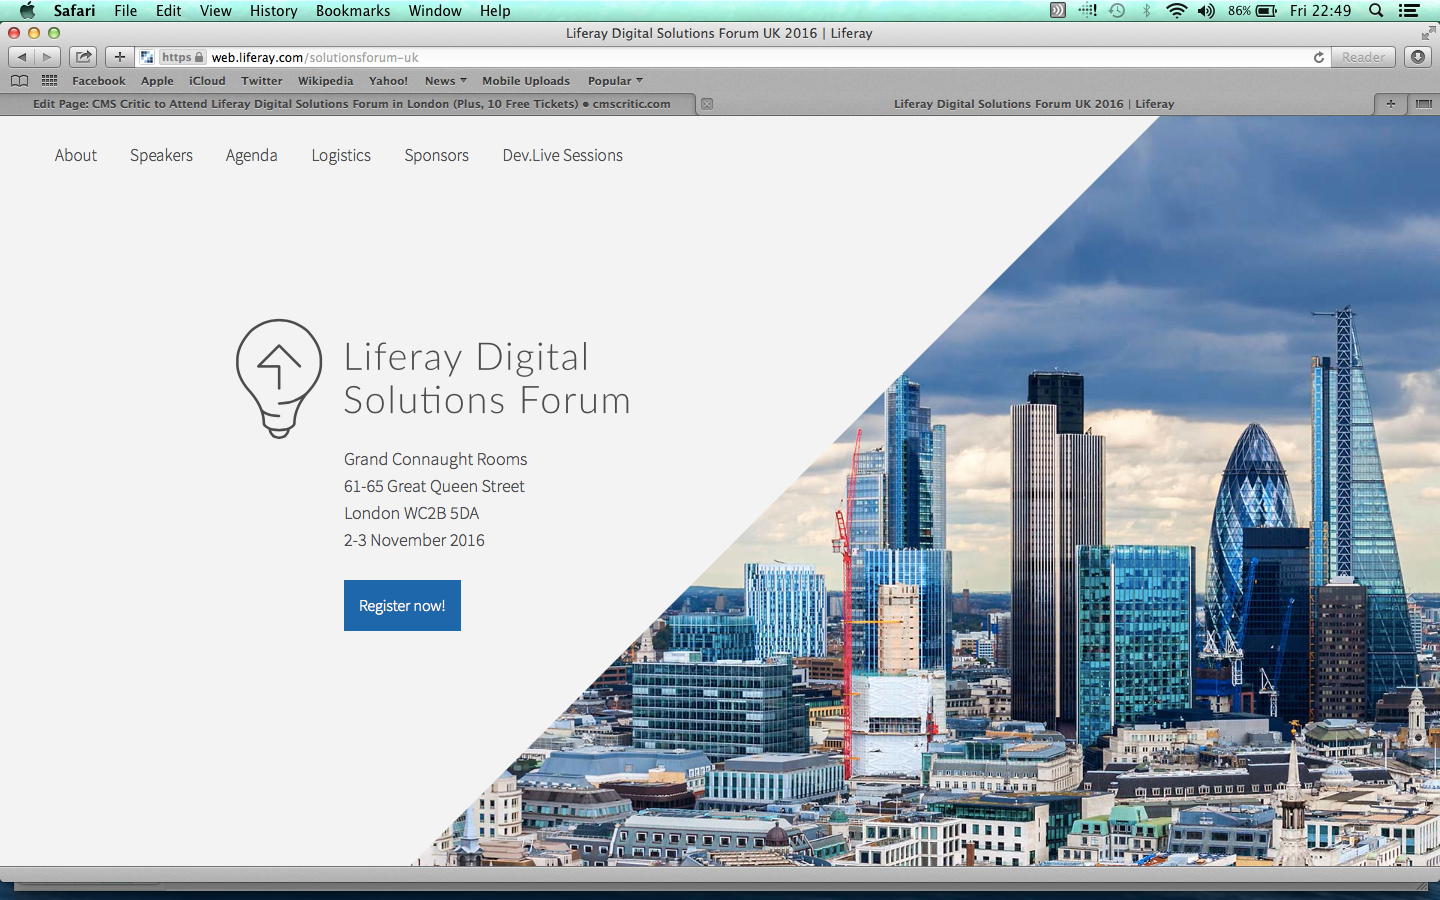 CMS Critic to Attend Liferay Digital Solutions Forum in London (Plus, 10 Free Tickets)